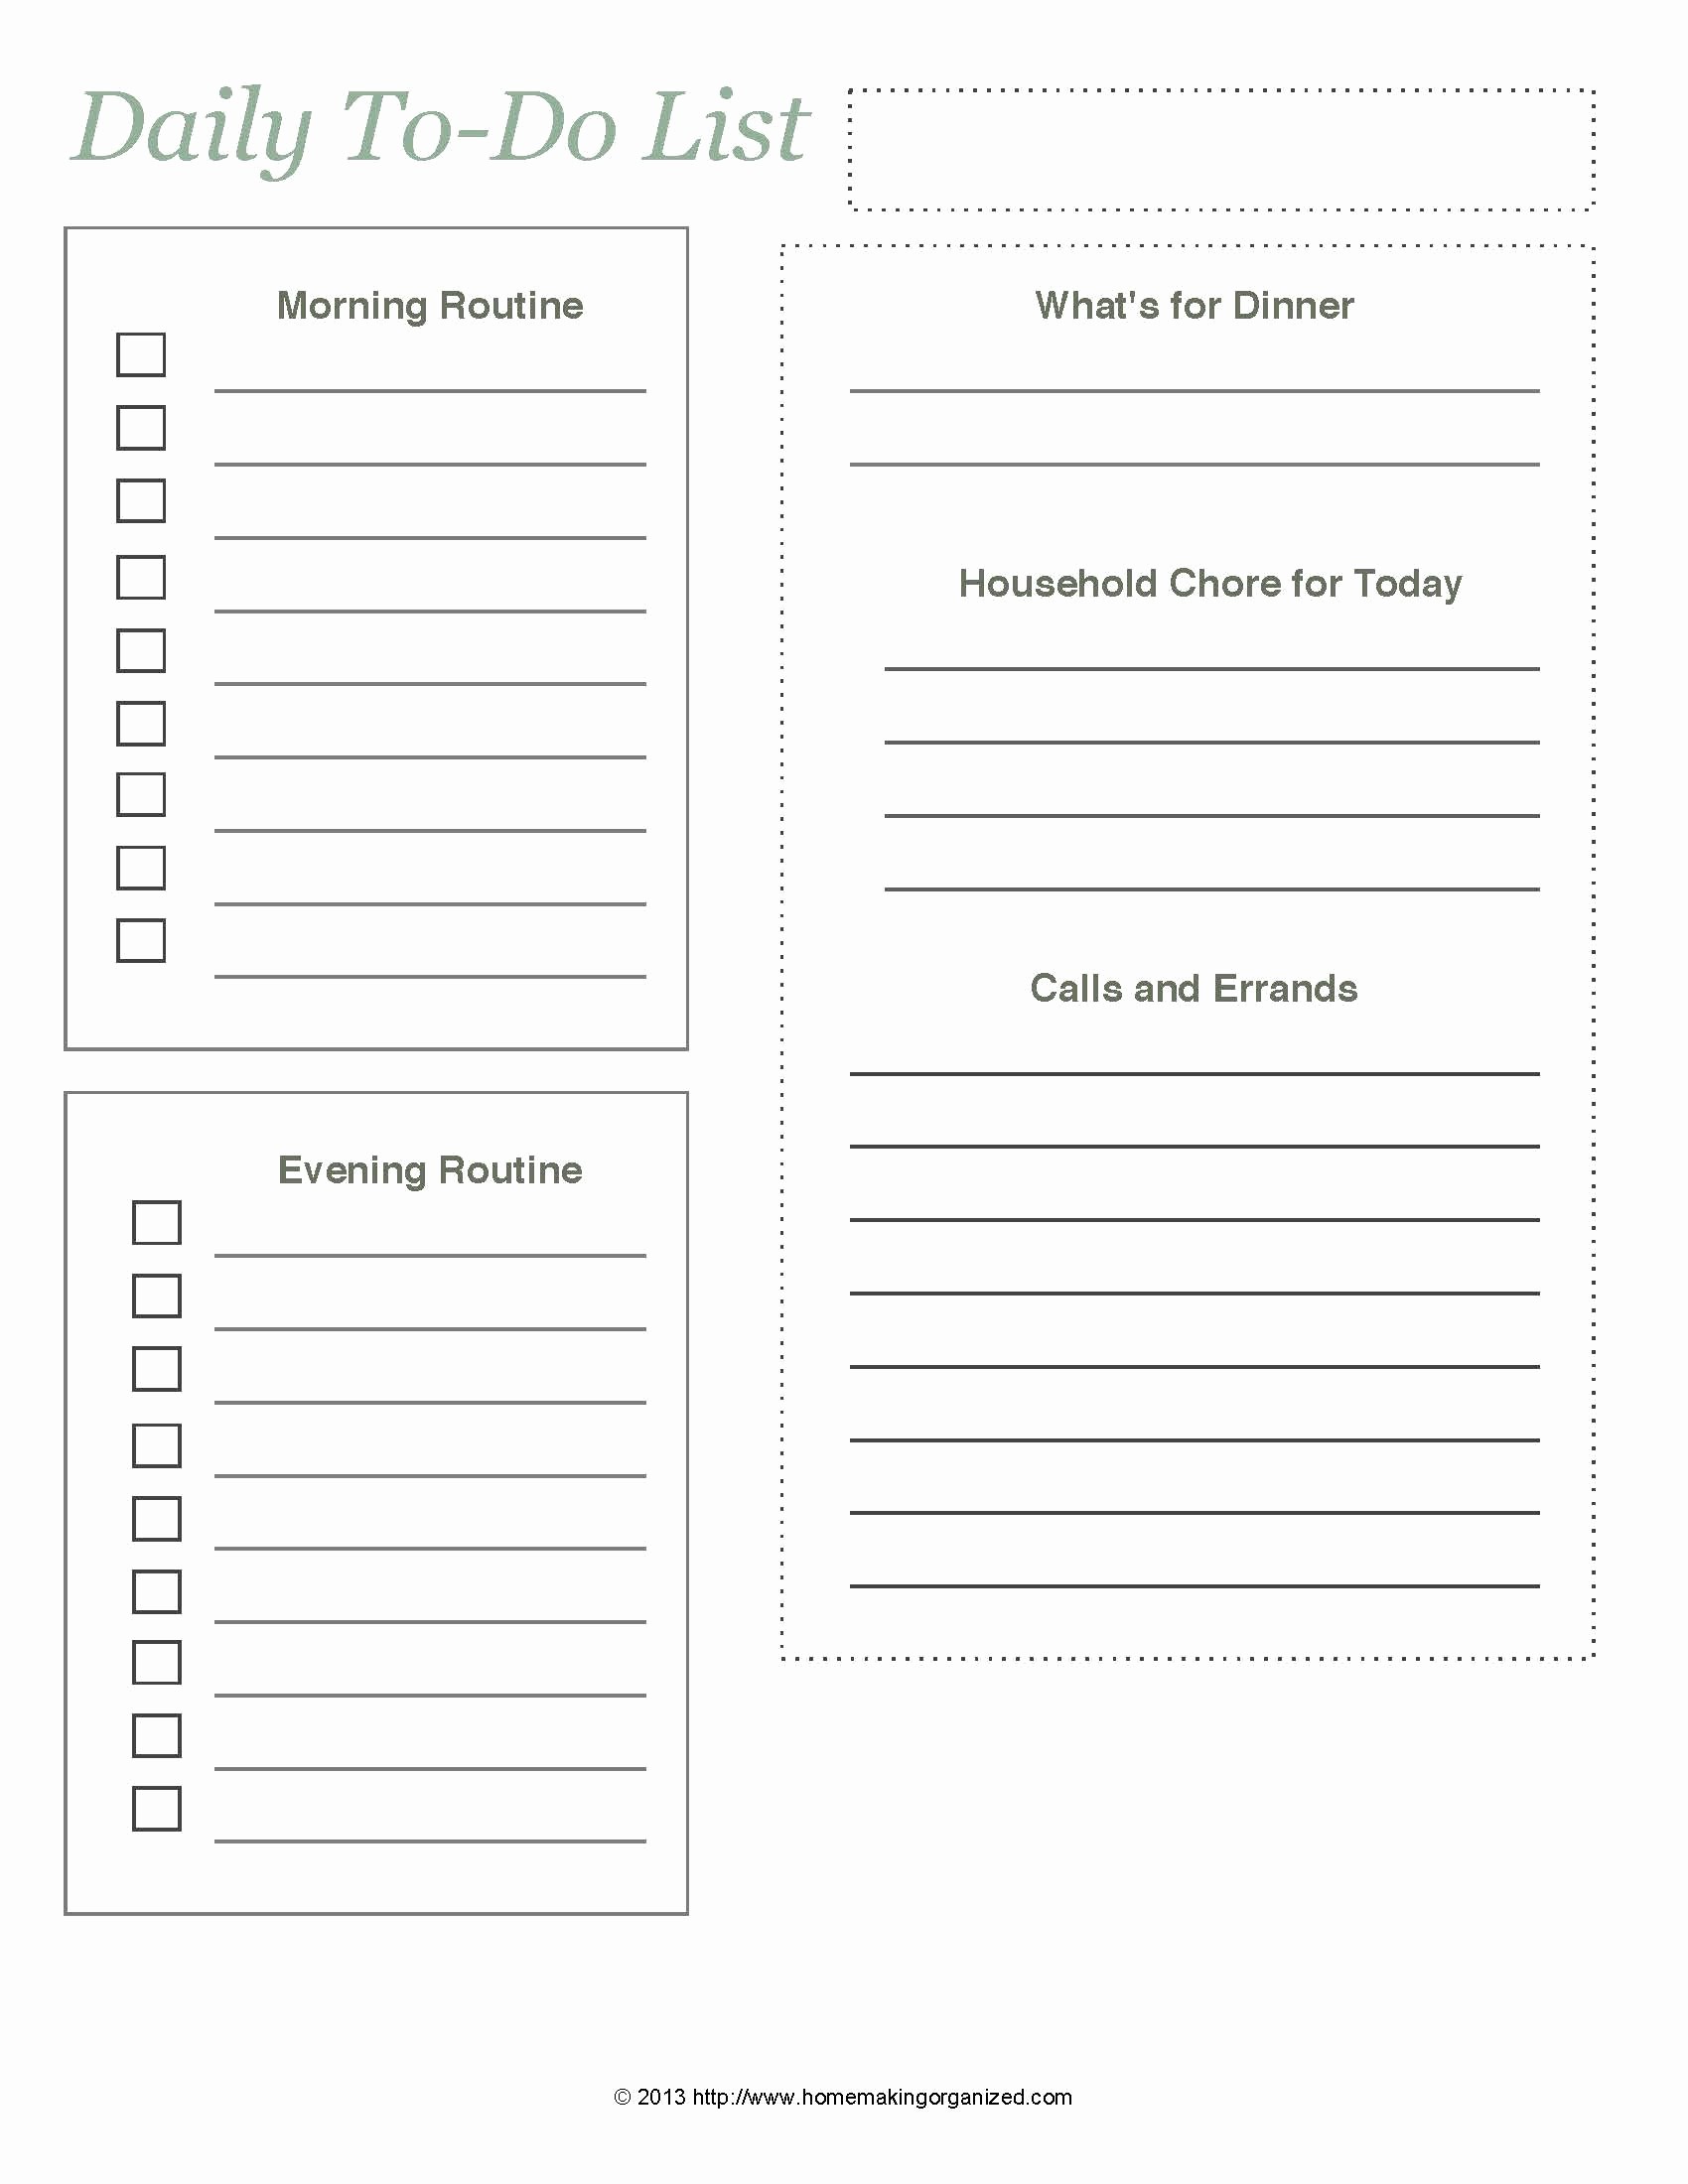 Daily to Do List Examples Best Of Home and Garden Free Printables Homemaking organized